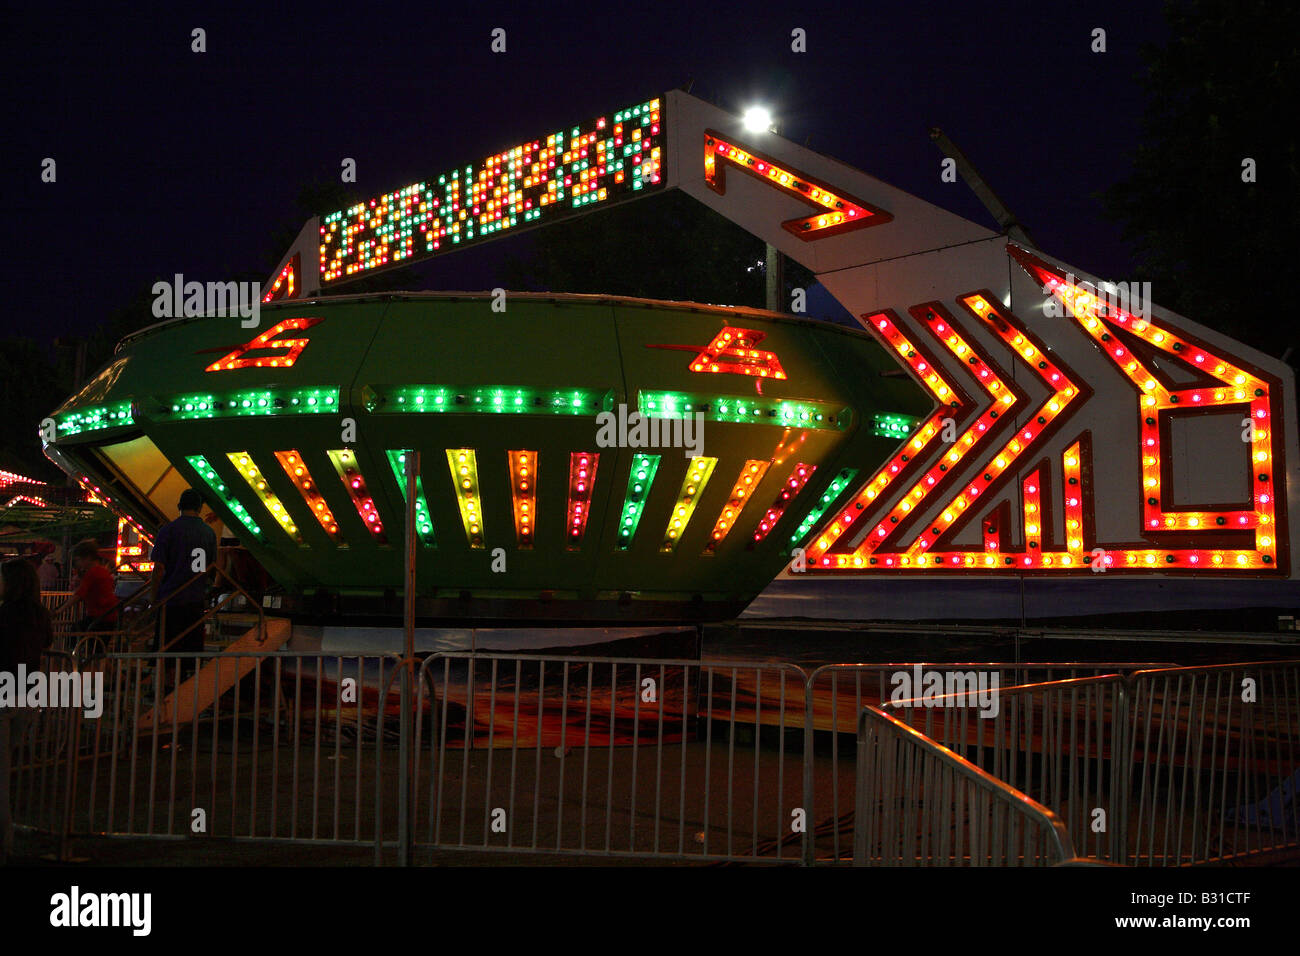 Space ship funfair ride.  Large flying saucer shape with bands of multi colored lights on the outside of fancy geometric shape. Stock Photo